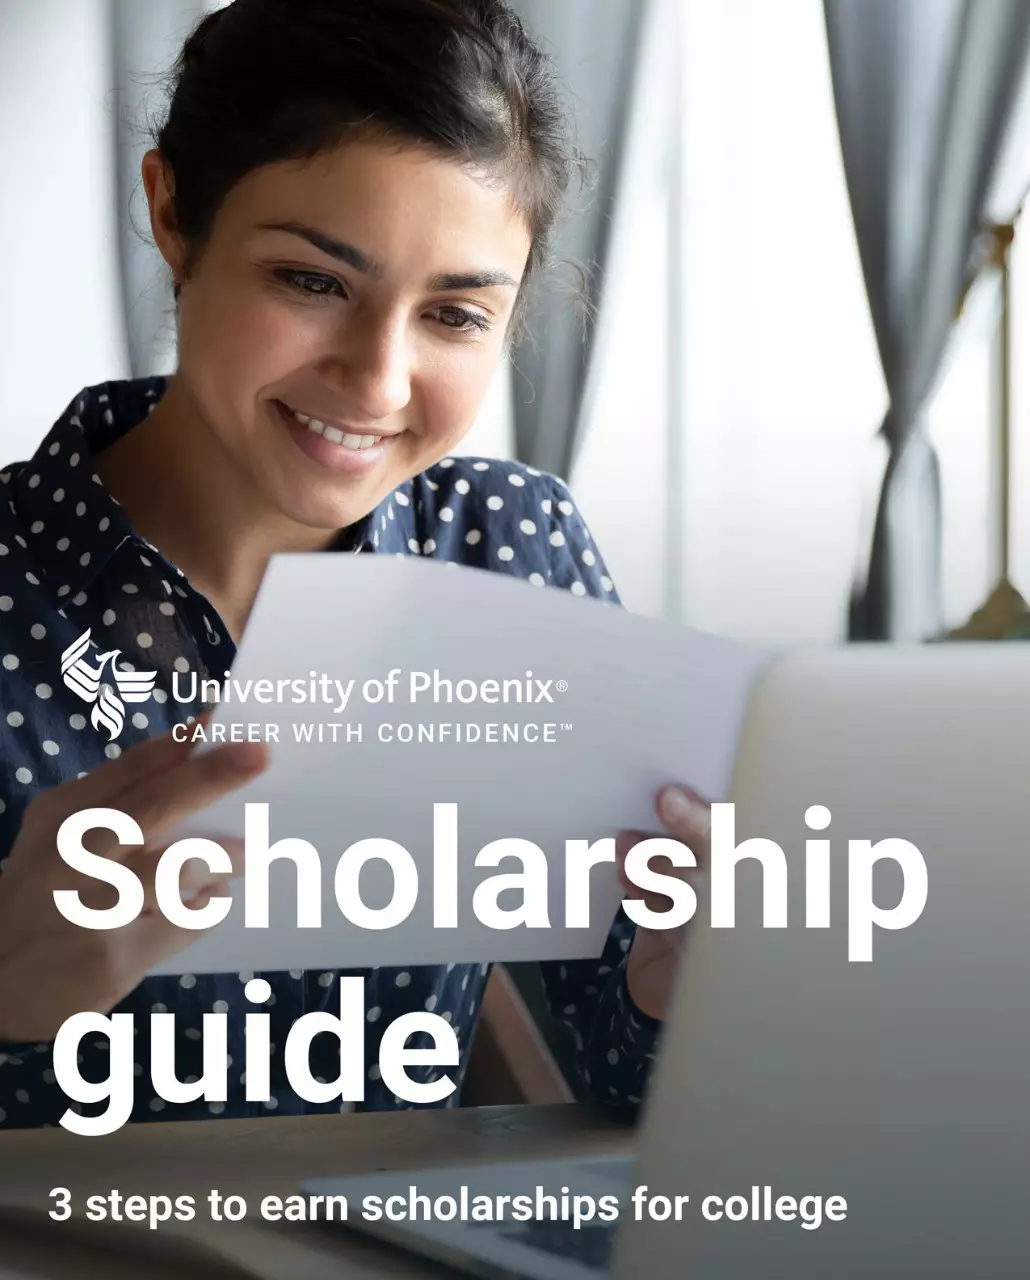 Scholarship guide: 3 steps to earn scholarships for college